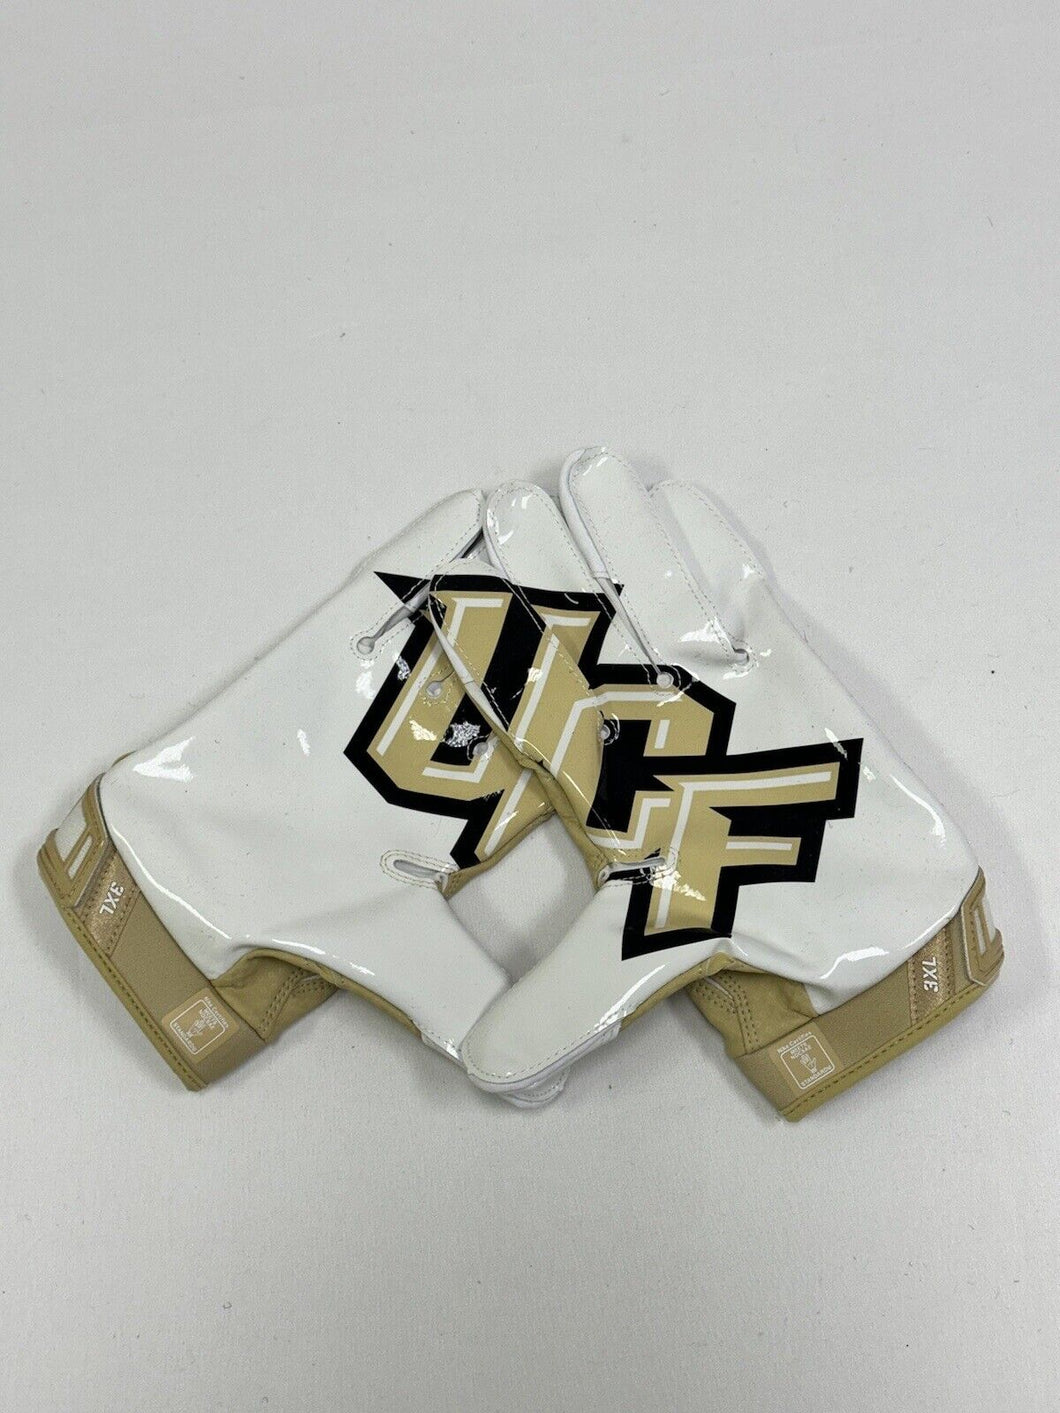 UCF Knights Game Issued / Worn Nike Vapor Jet Football Gloves - Size 3XL